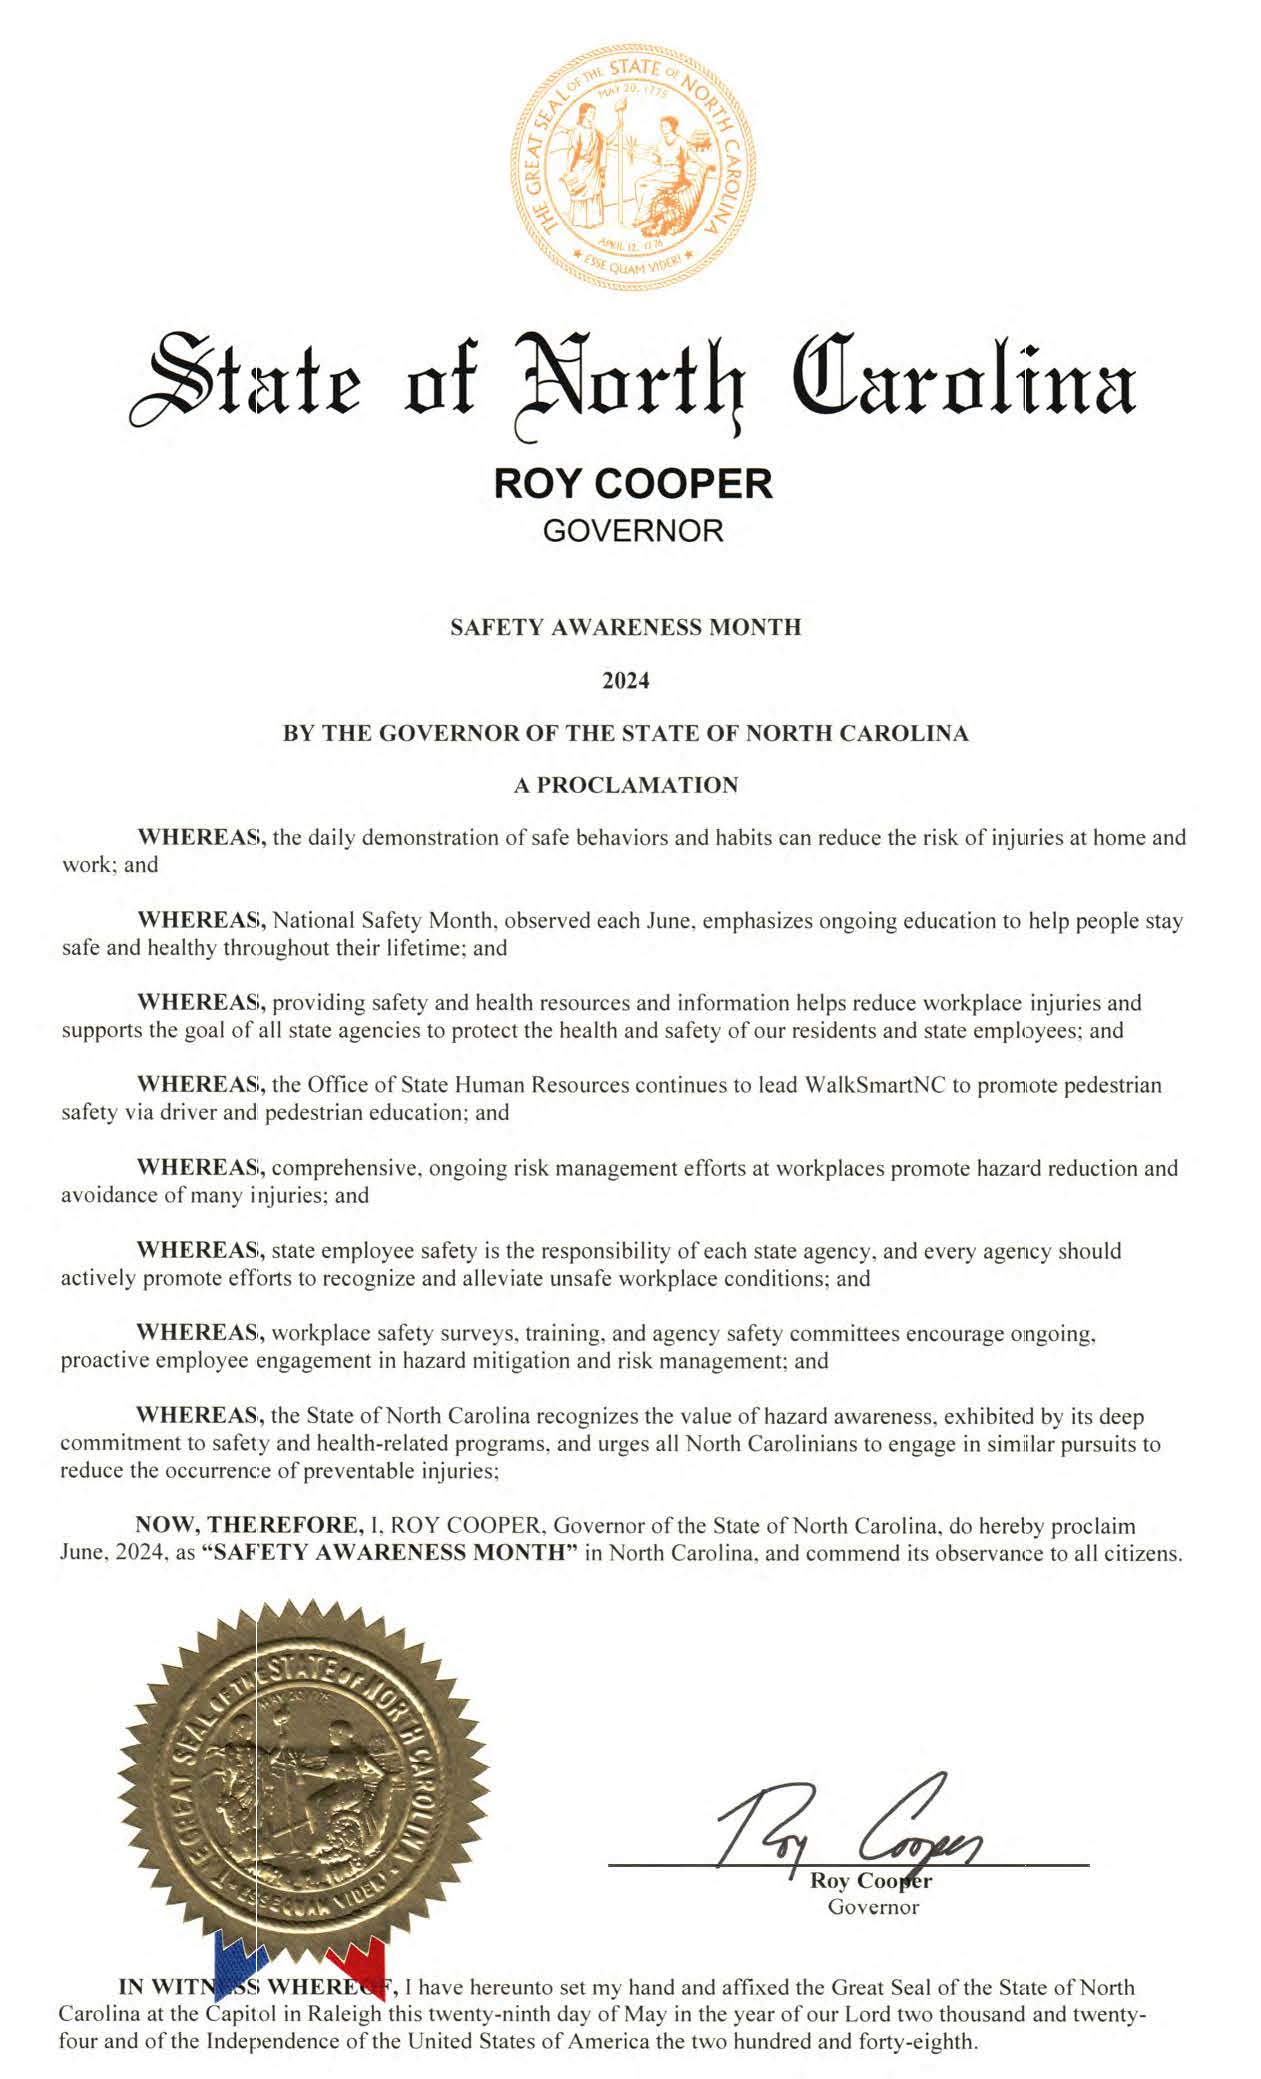 Safety Awareness Month 2024 proclamation